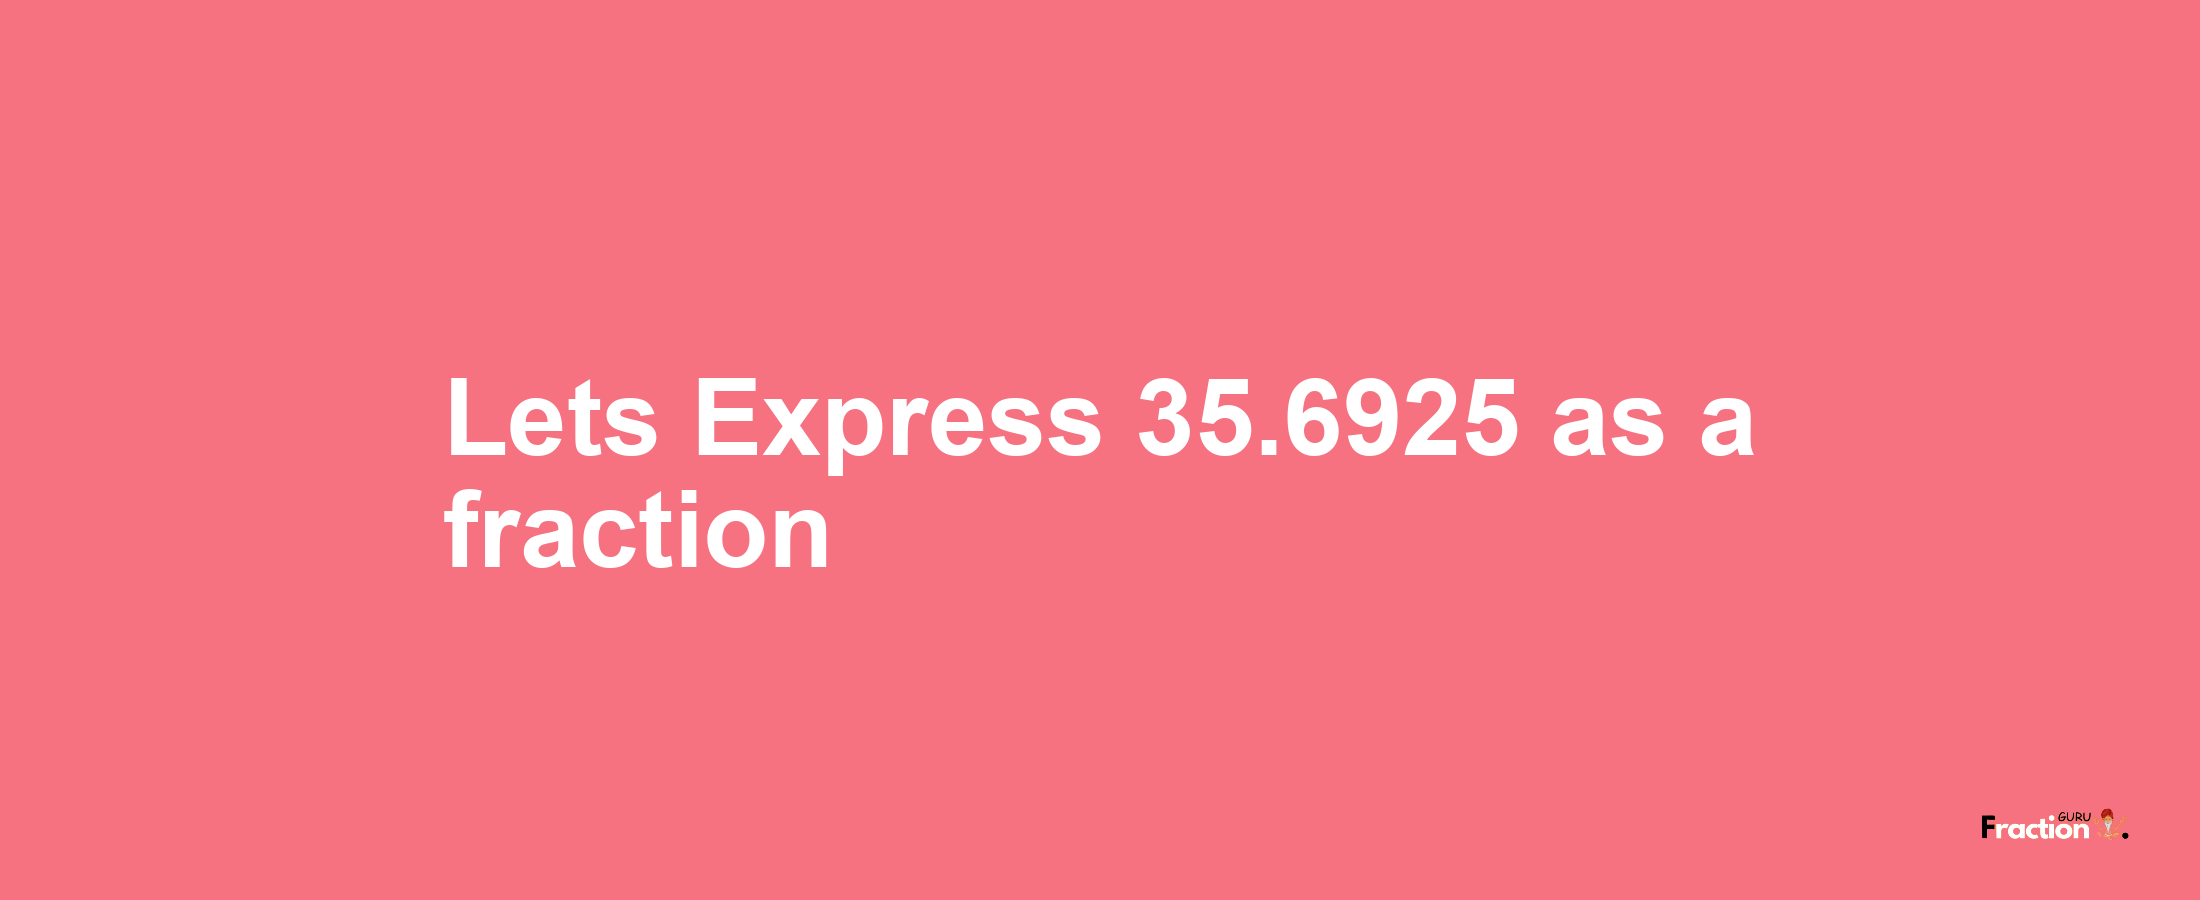 Lets Express 35.6925 as afraction